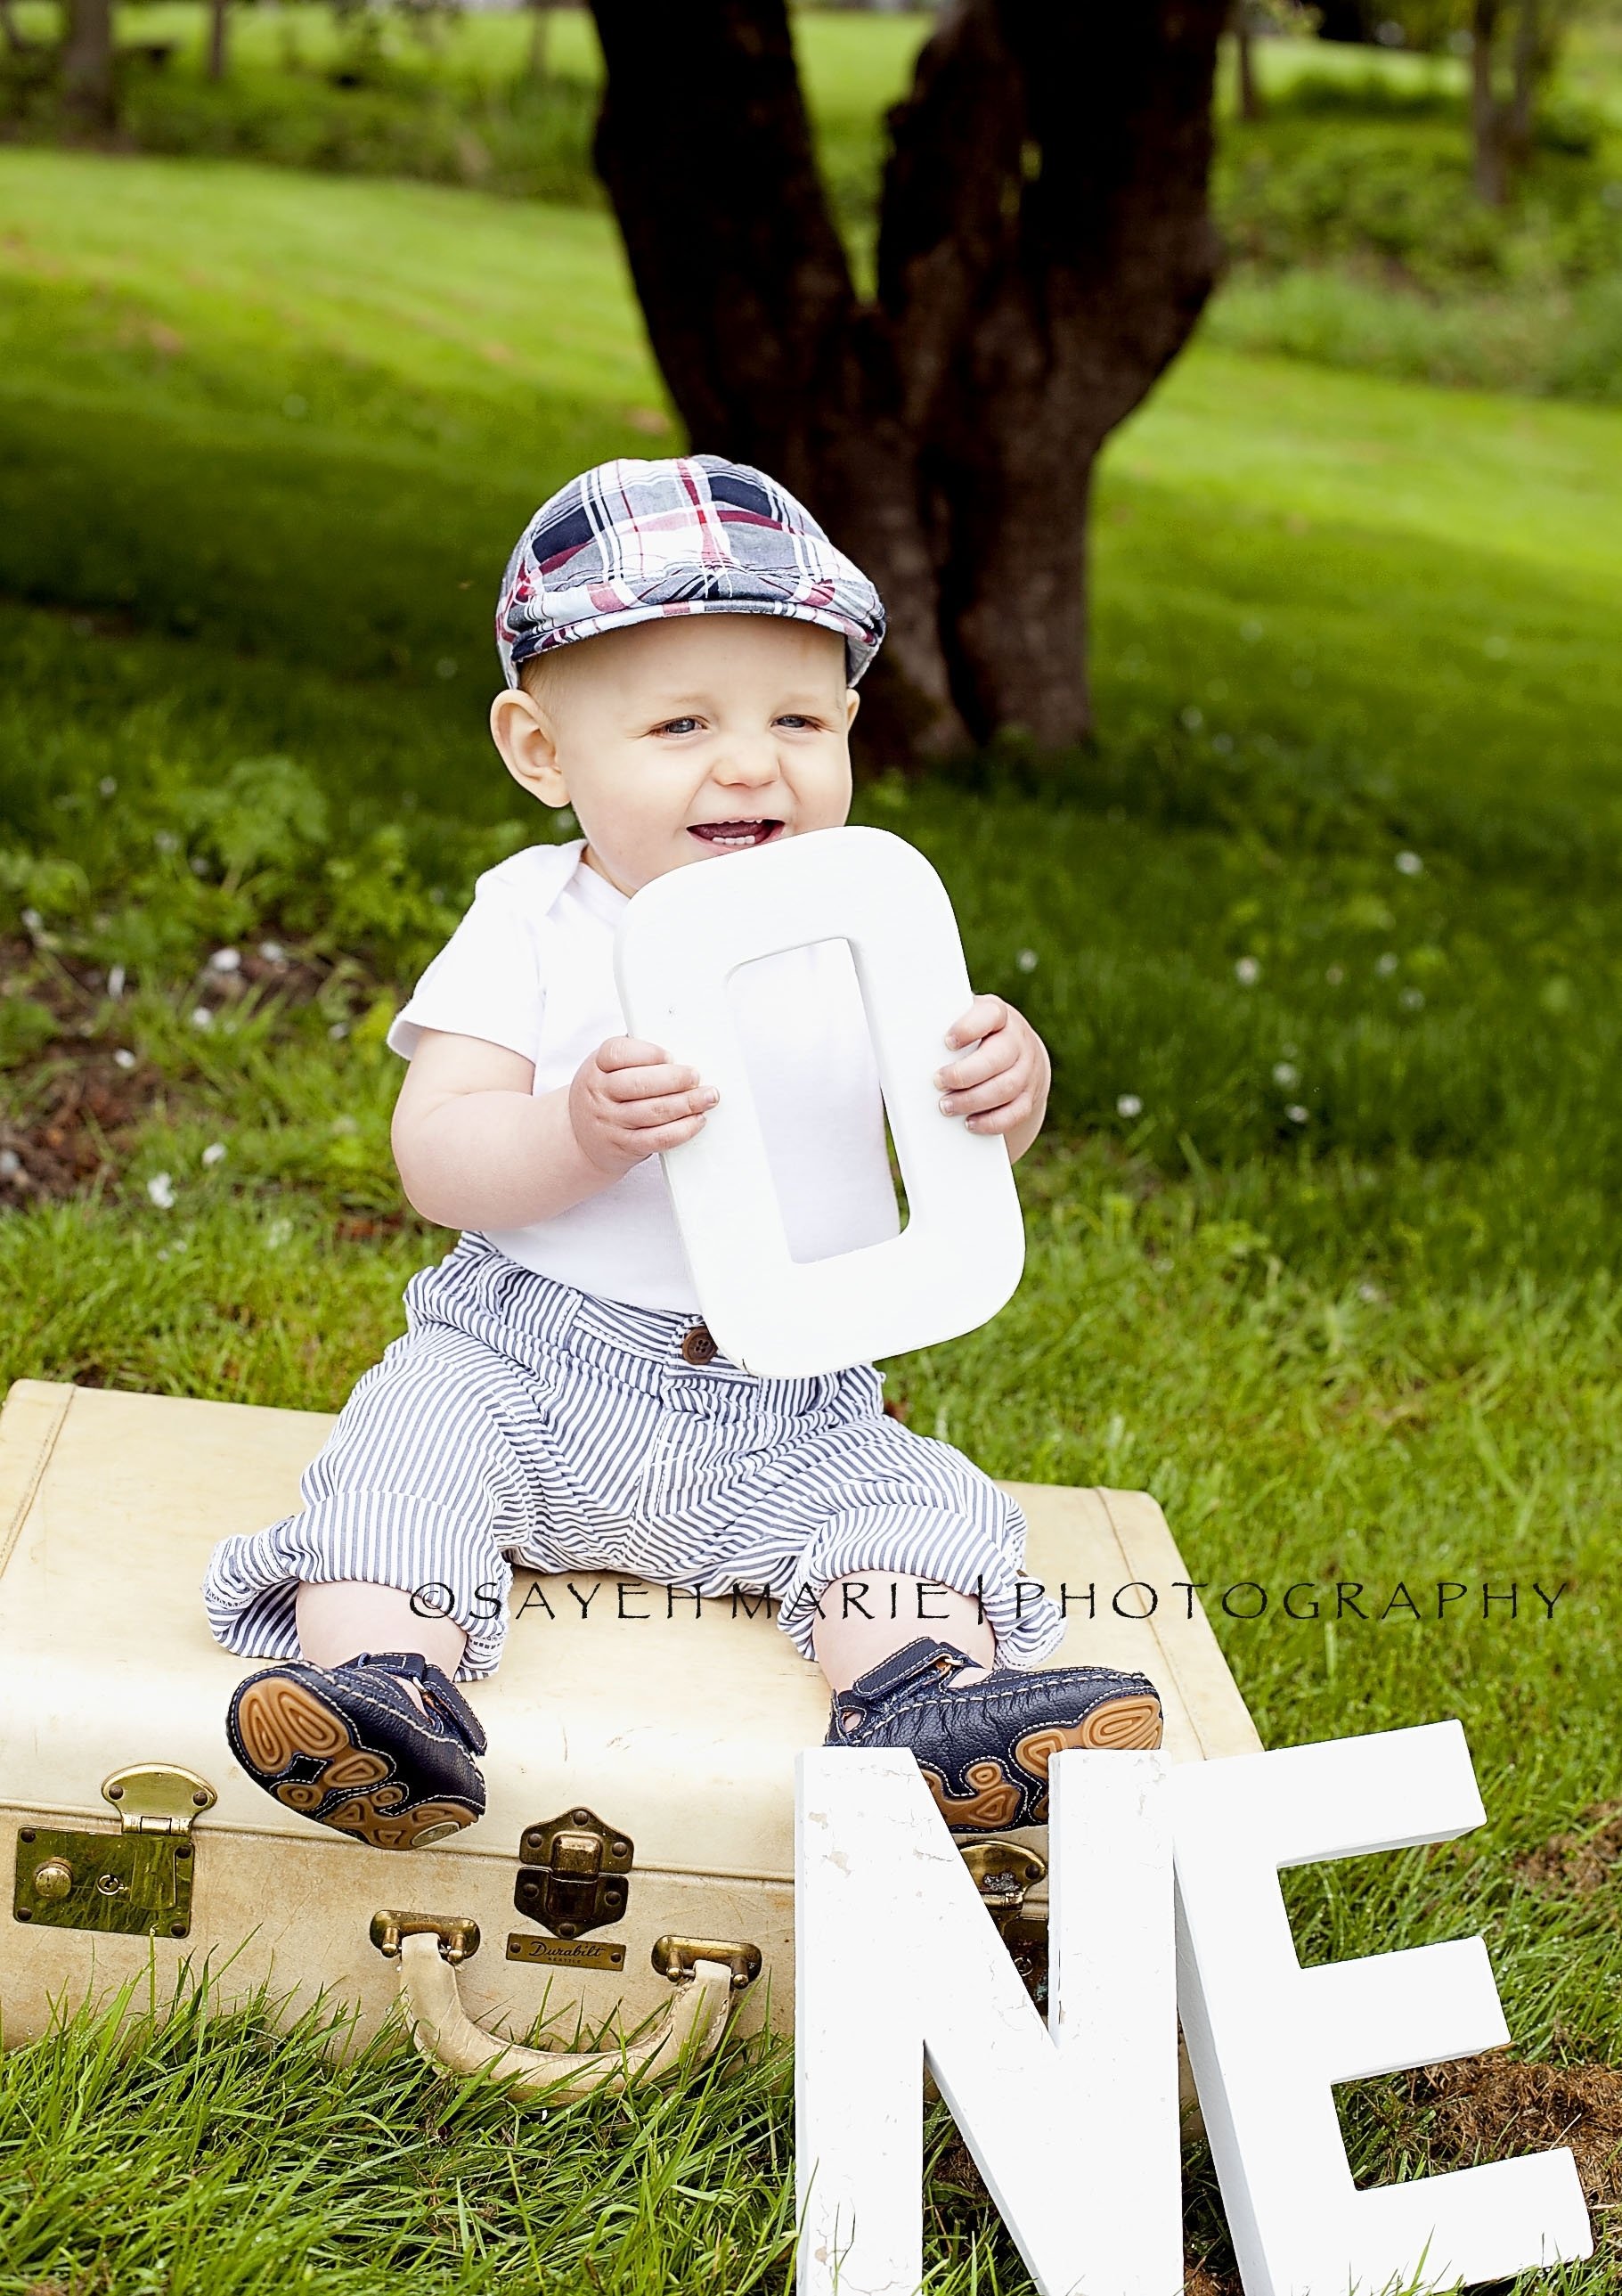 10 Fabulous 1 Year Old Photo Ideas one year old baby boy sayeh marie photography pinterest 2022